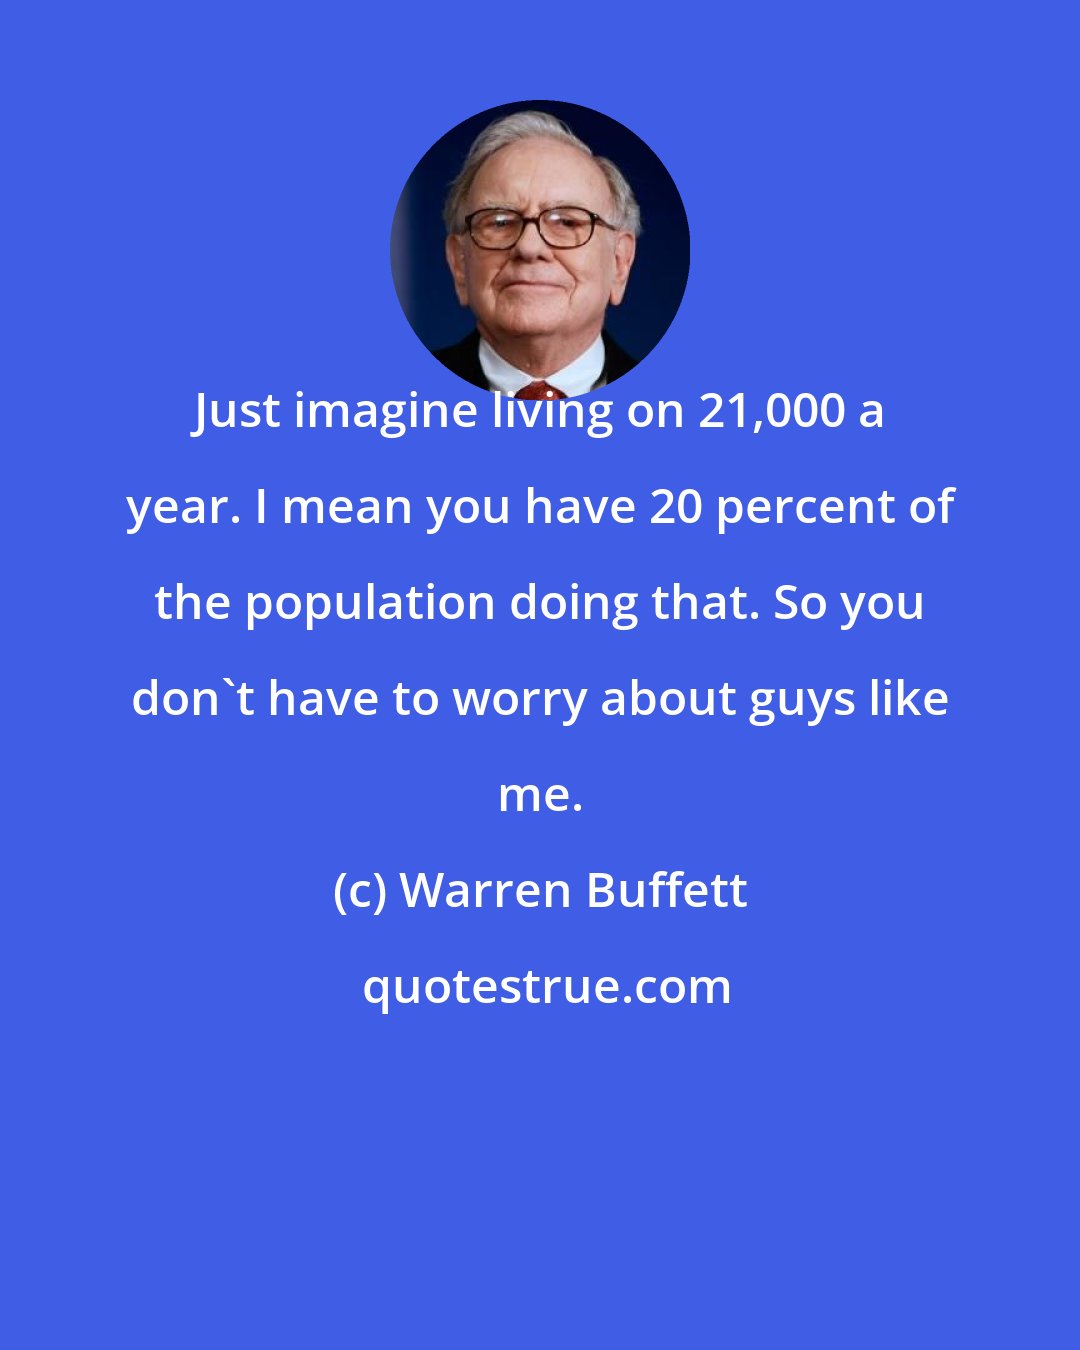 Warren Buffett: Just imagine living on 21,000 a year. I mean you have 20 percent of the population doing that. So you don't have to worry about guys like me.